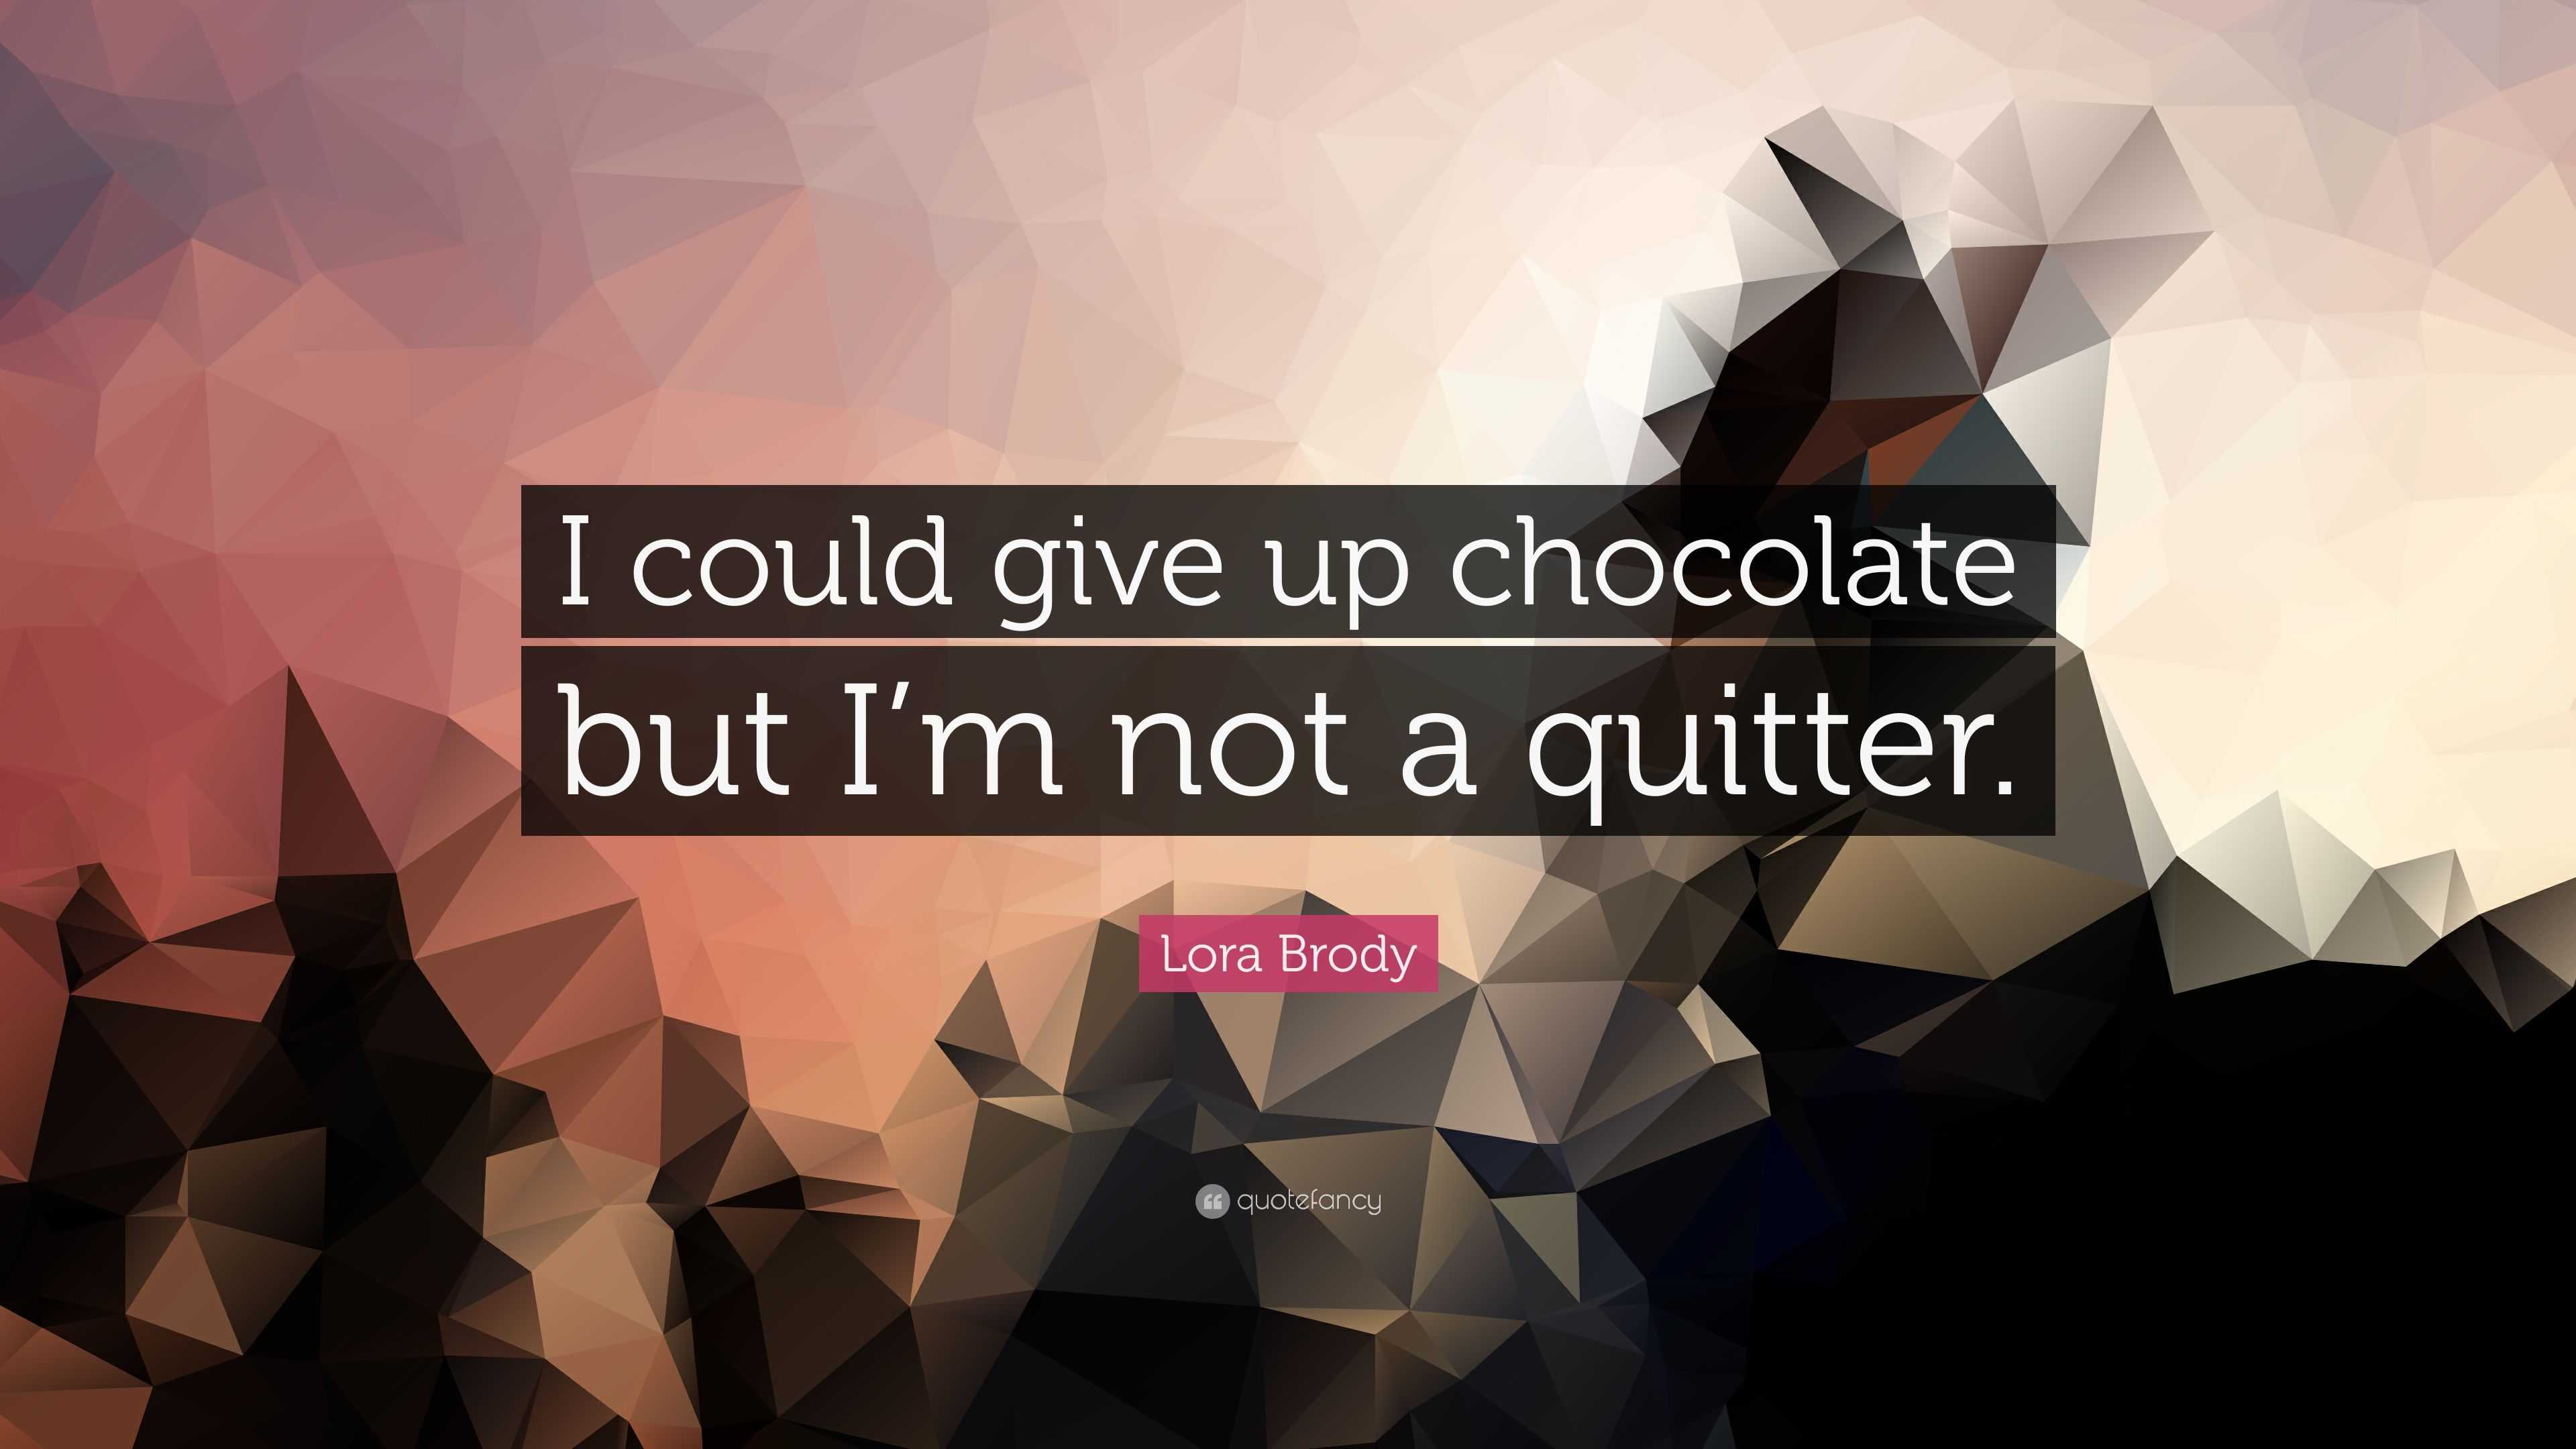 Lora Brody Quote: “I could give up chocolate but I’m not a quitter.”